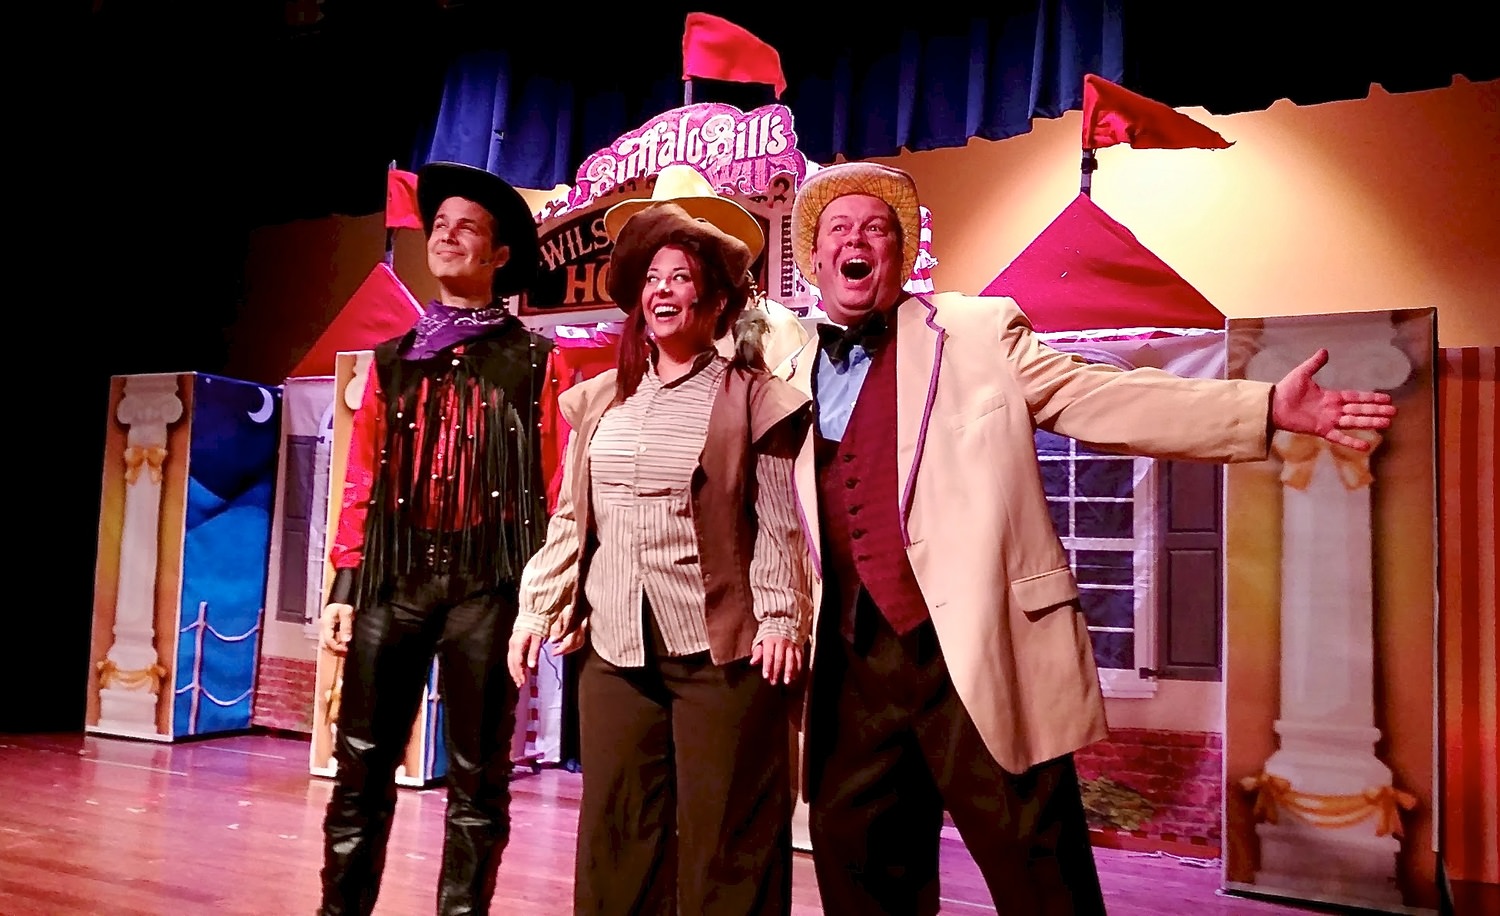 Jordana Forrest as Annie Oakley and James Skiba as Frank Butler in the Curtain Call Playhouse production of Annie Get Your Gun. http://www.geoffreybshort.com/events.html 7